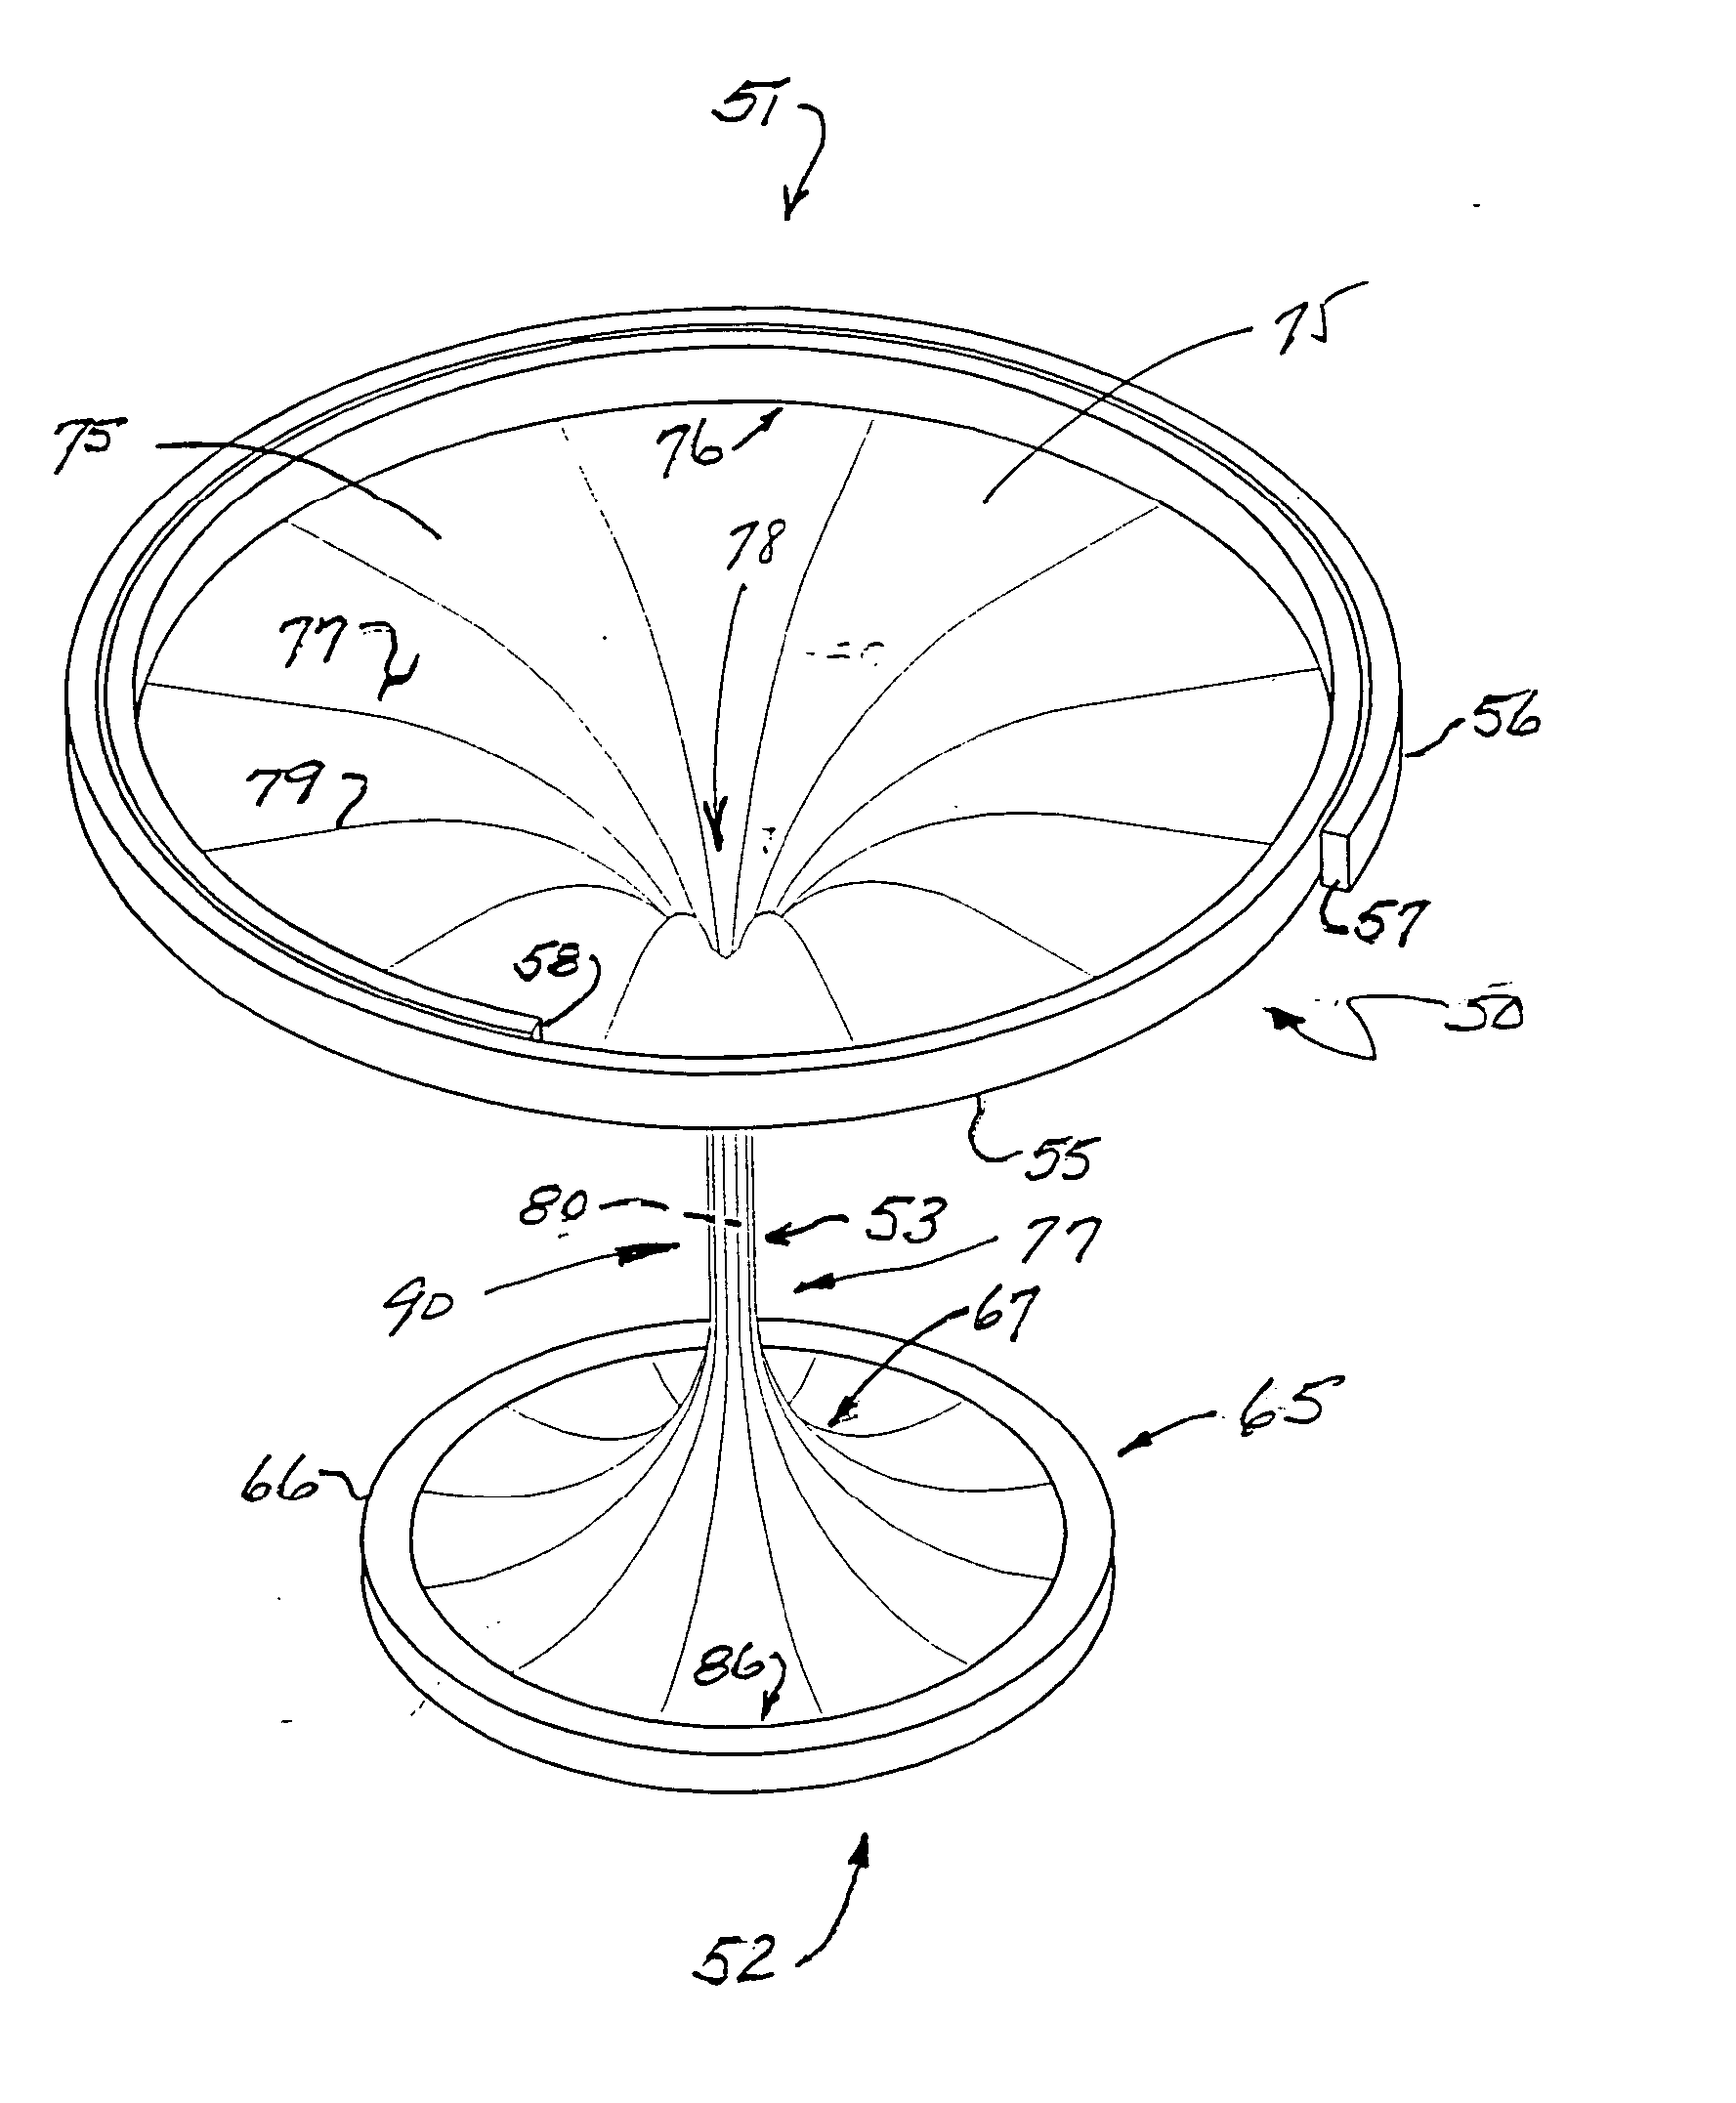 Sealed surgical access device